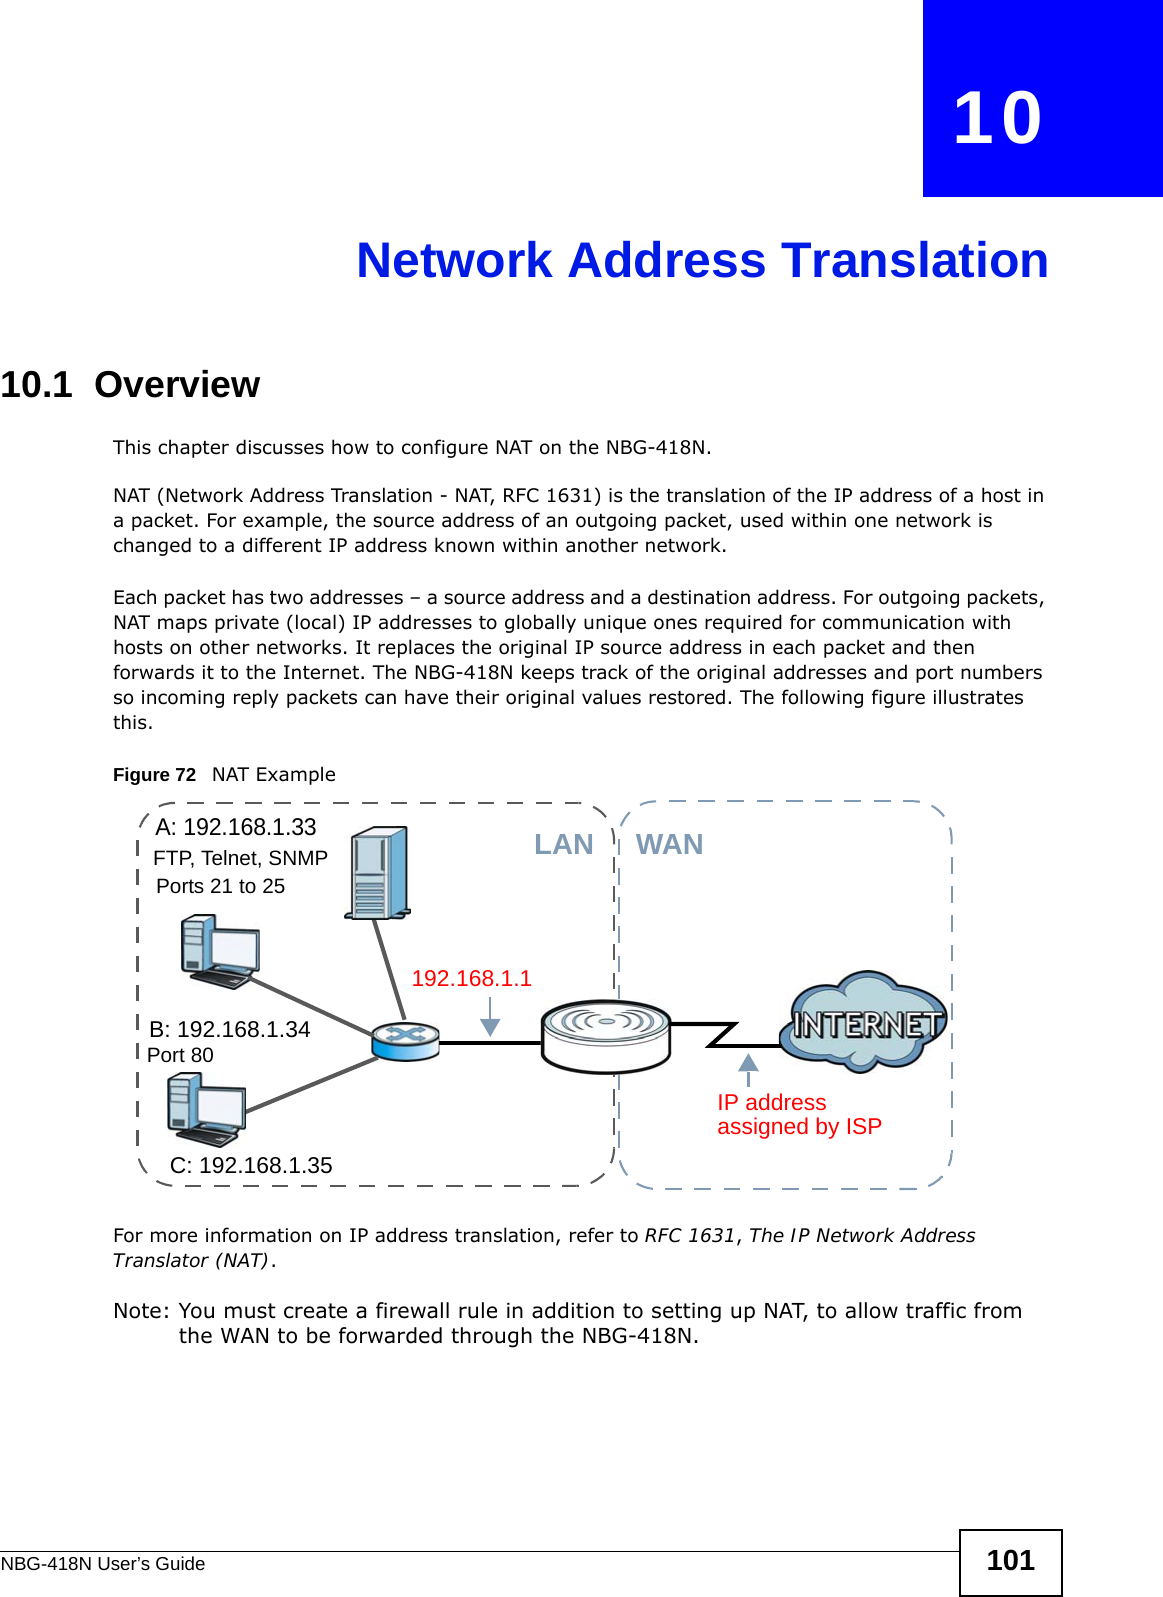 NBG-418N User’s Guide 101CHAPTER   10Network Address Translation10.1  Overview   This chapter discusses how to configure NAT on the NBG-418N.NAT (Network Address Translation - NAT, RFC 1631) is the translation of the IP address of a host in a packet. For example, the source address of an outgoing packet, used within one network is changed to a different IP address known within another network.Each packet has two addresses – a source address and a destination address. For outgoing packets, NAT maps private (local) IP addresses to globally unique ones required for communication with hosts on other networks. It replaces the original IP source address in each packet and then forwards it to the Internet. The NBG-418N keeps track of the original addresses and port numbers so incoming reply packets can have their original values restored. The following figure illustrates this.Figure 72   NAT ExampleFor more information on IP address translation, refer to RFC 1631, The IP Network Address Translator (NAT). Note: You must create a firewall rule in addition to setting up NAT, to allow traffic from the WAN to be forwarded through the NBG-418N.A: 192.168.1.33B: 192.168.1.34C: 192.168.1.35IP address 192.168.1.1WANLANassigned by ISPFTP, Telnet, SNMPPort 80Ports 21 to 25